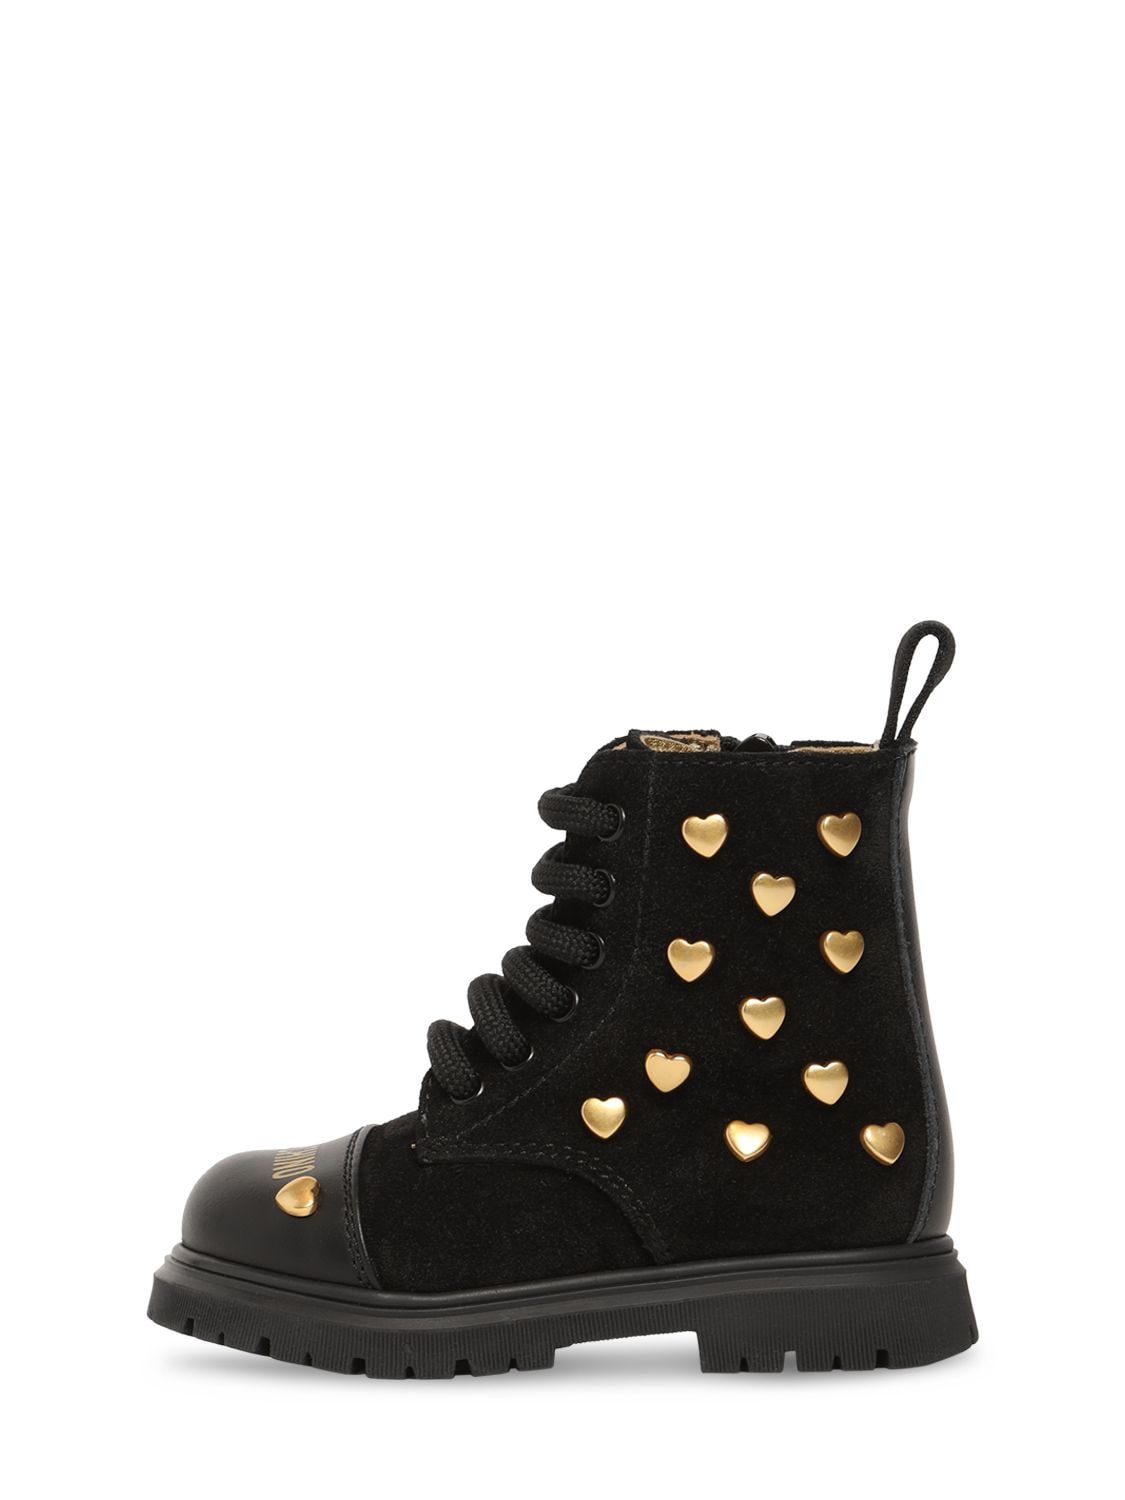 Image of Suede Boots W/hearts